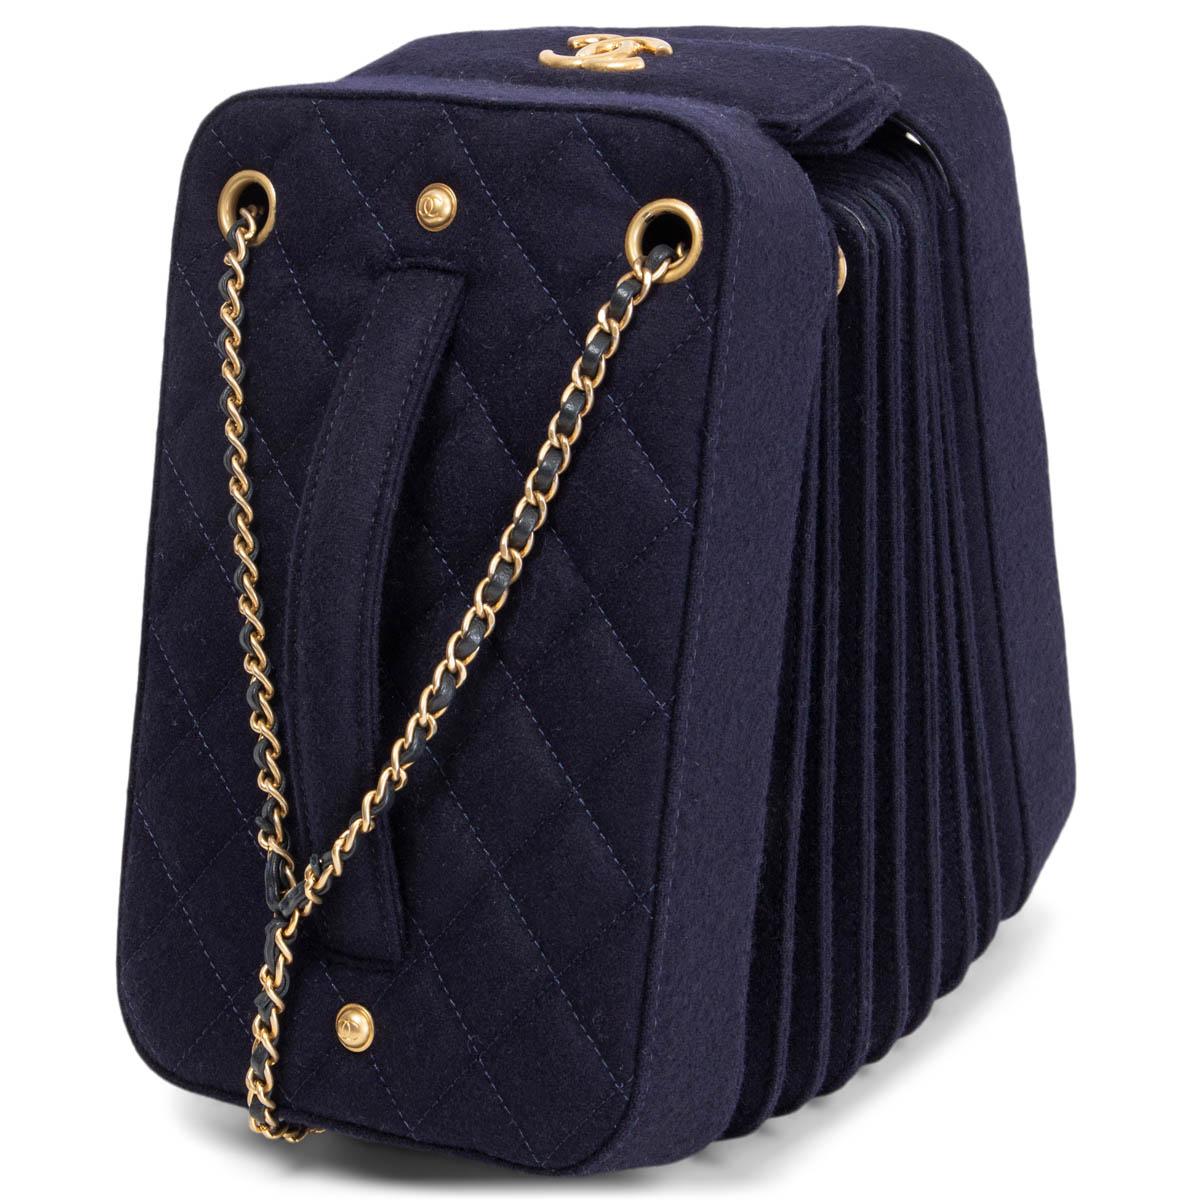 100% authentic Chanel Accordion crossbody Bag in navy blue wool featuring gold-tone hardware. Part of the Metiers d'Art 2018 Paris-Hambourg runway collection. Open with a magnetic CC button on top and is lined in midnight blue lambskin. Has been